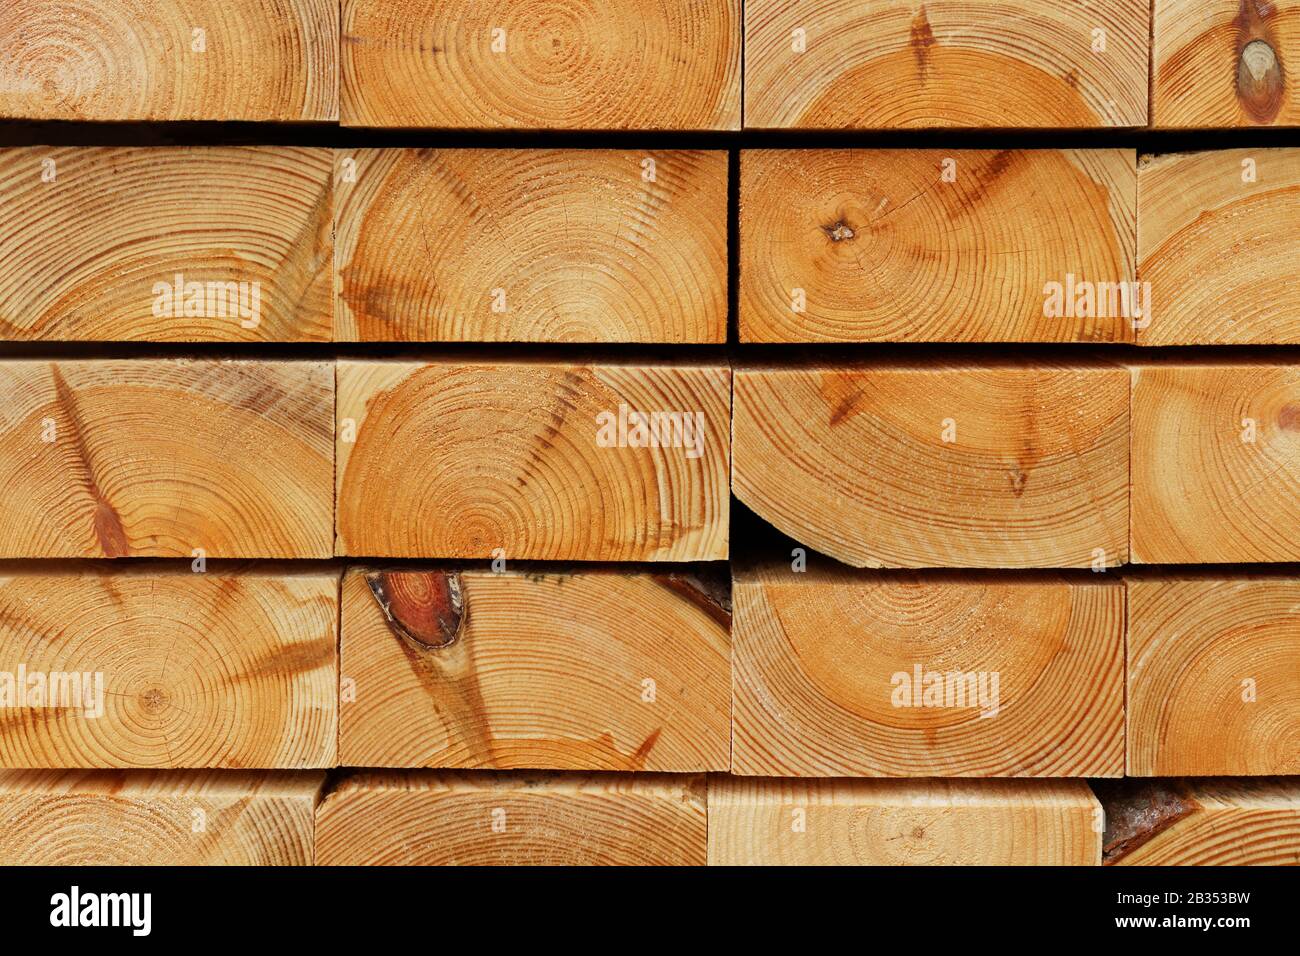 Construction Timber Background: Cutting Edges of Piled Pine Thick Boards Stock Photo